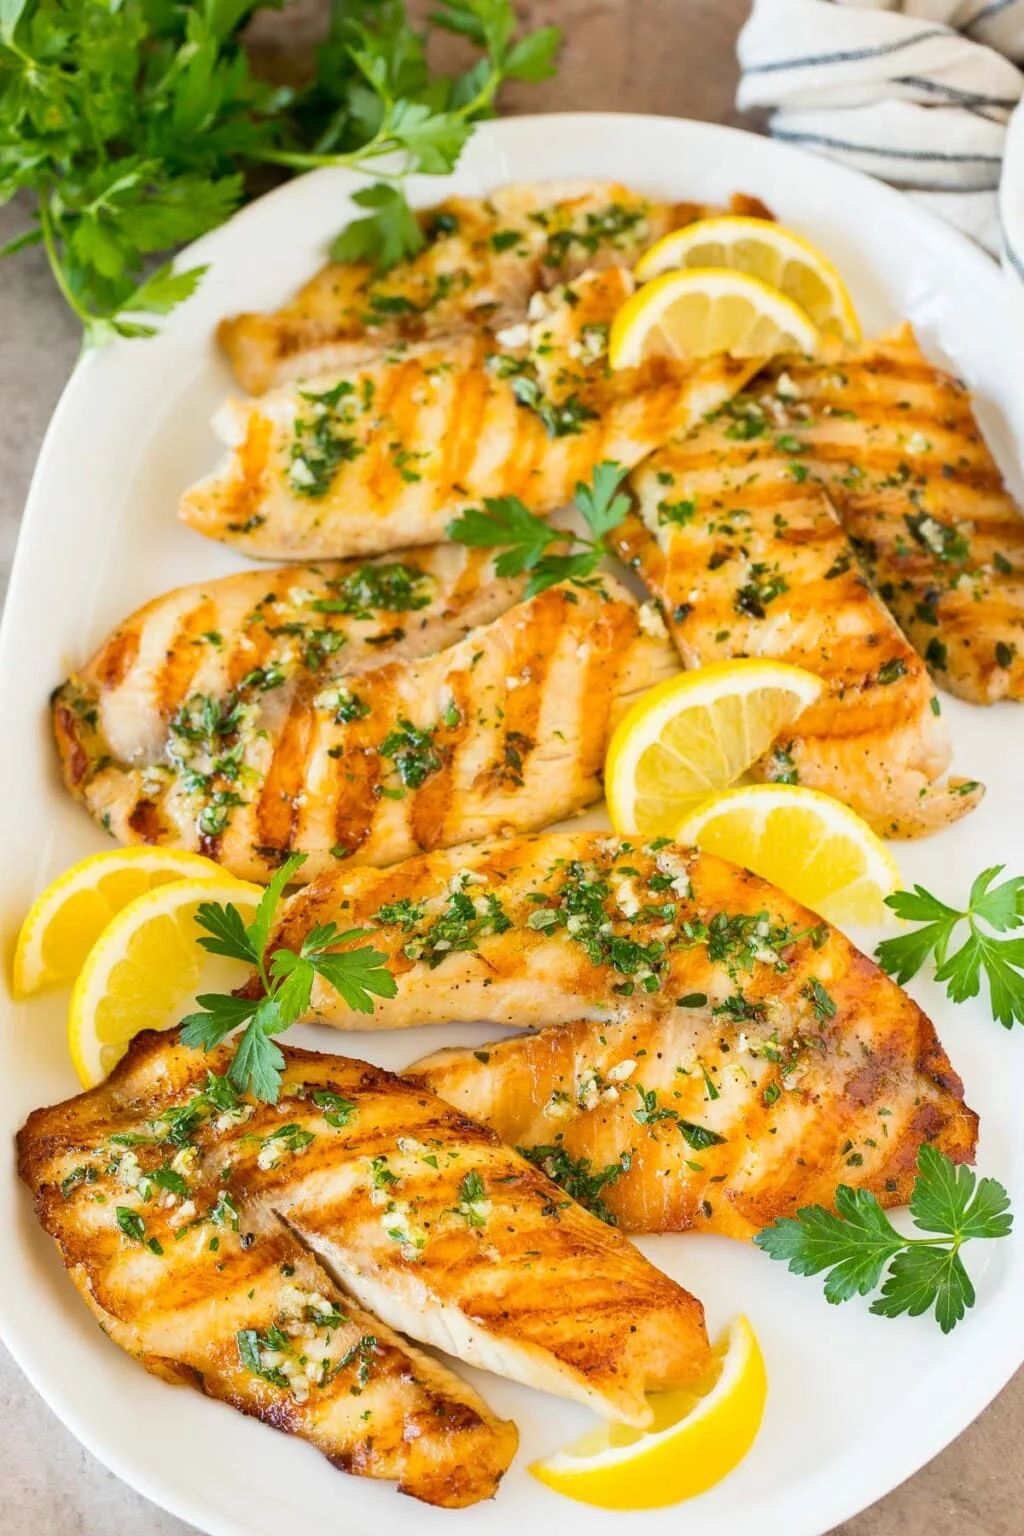  Grilled Tilapia with Garlic and Herbs